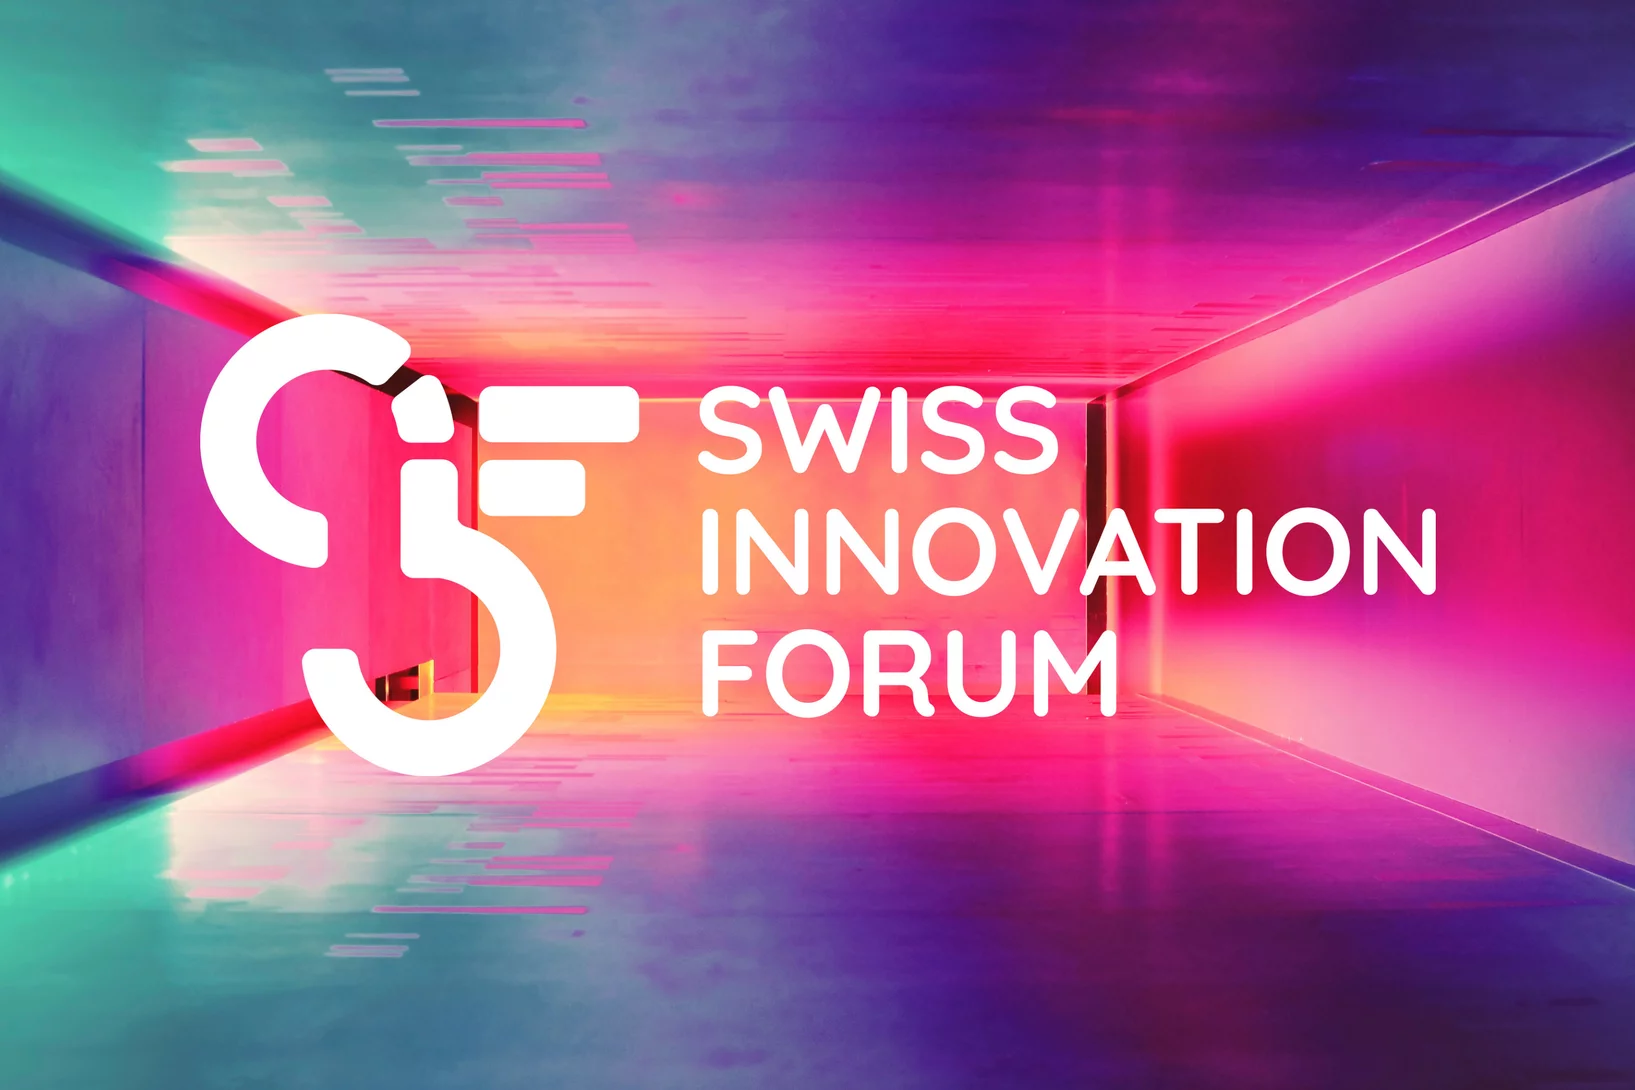 SIF 2021 will take place in the Congress Center in Basel on 18th November 2021 (image source: Swiss Innovation Forum).